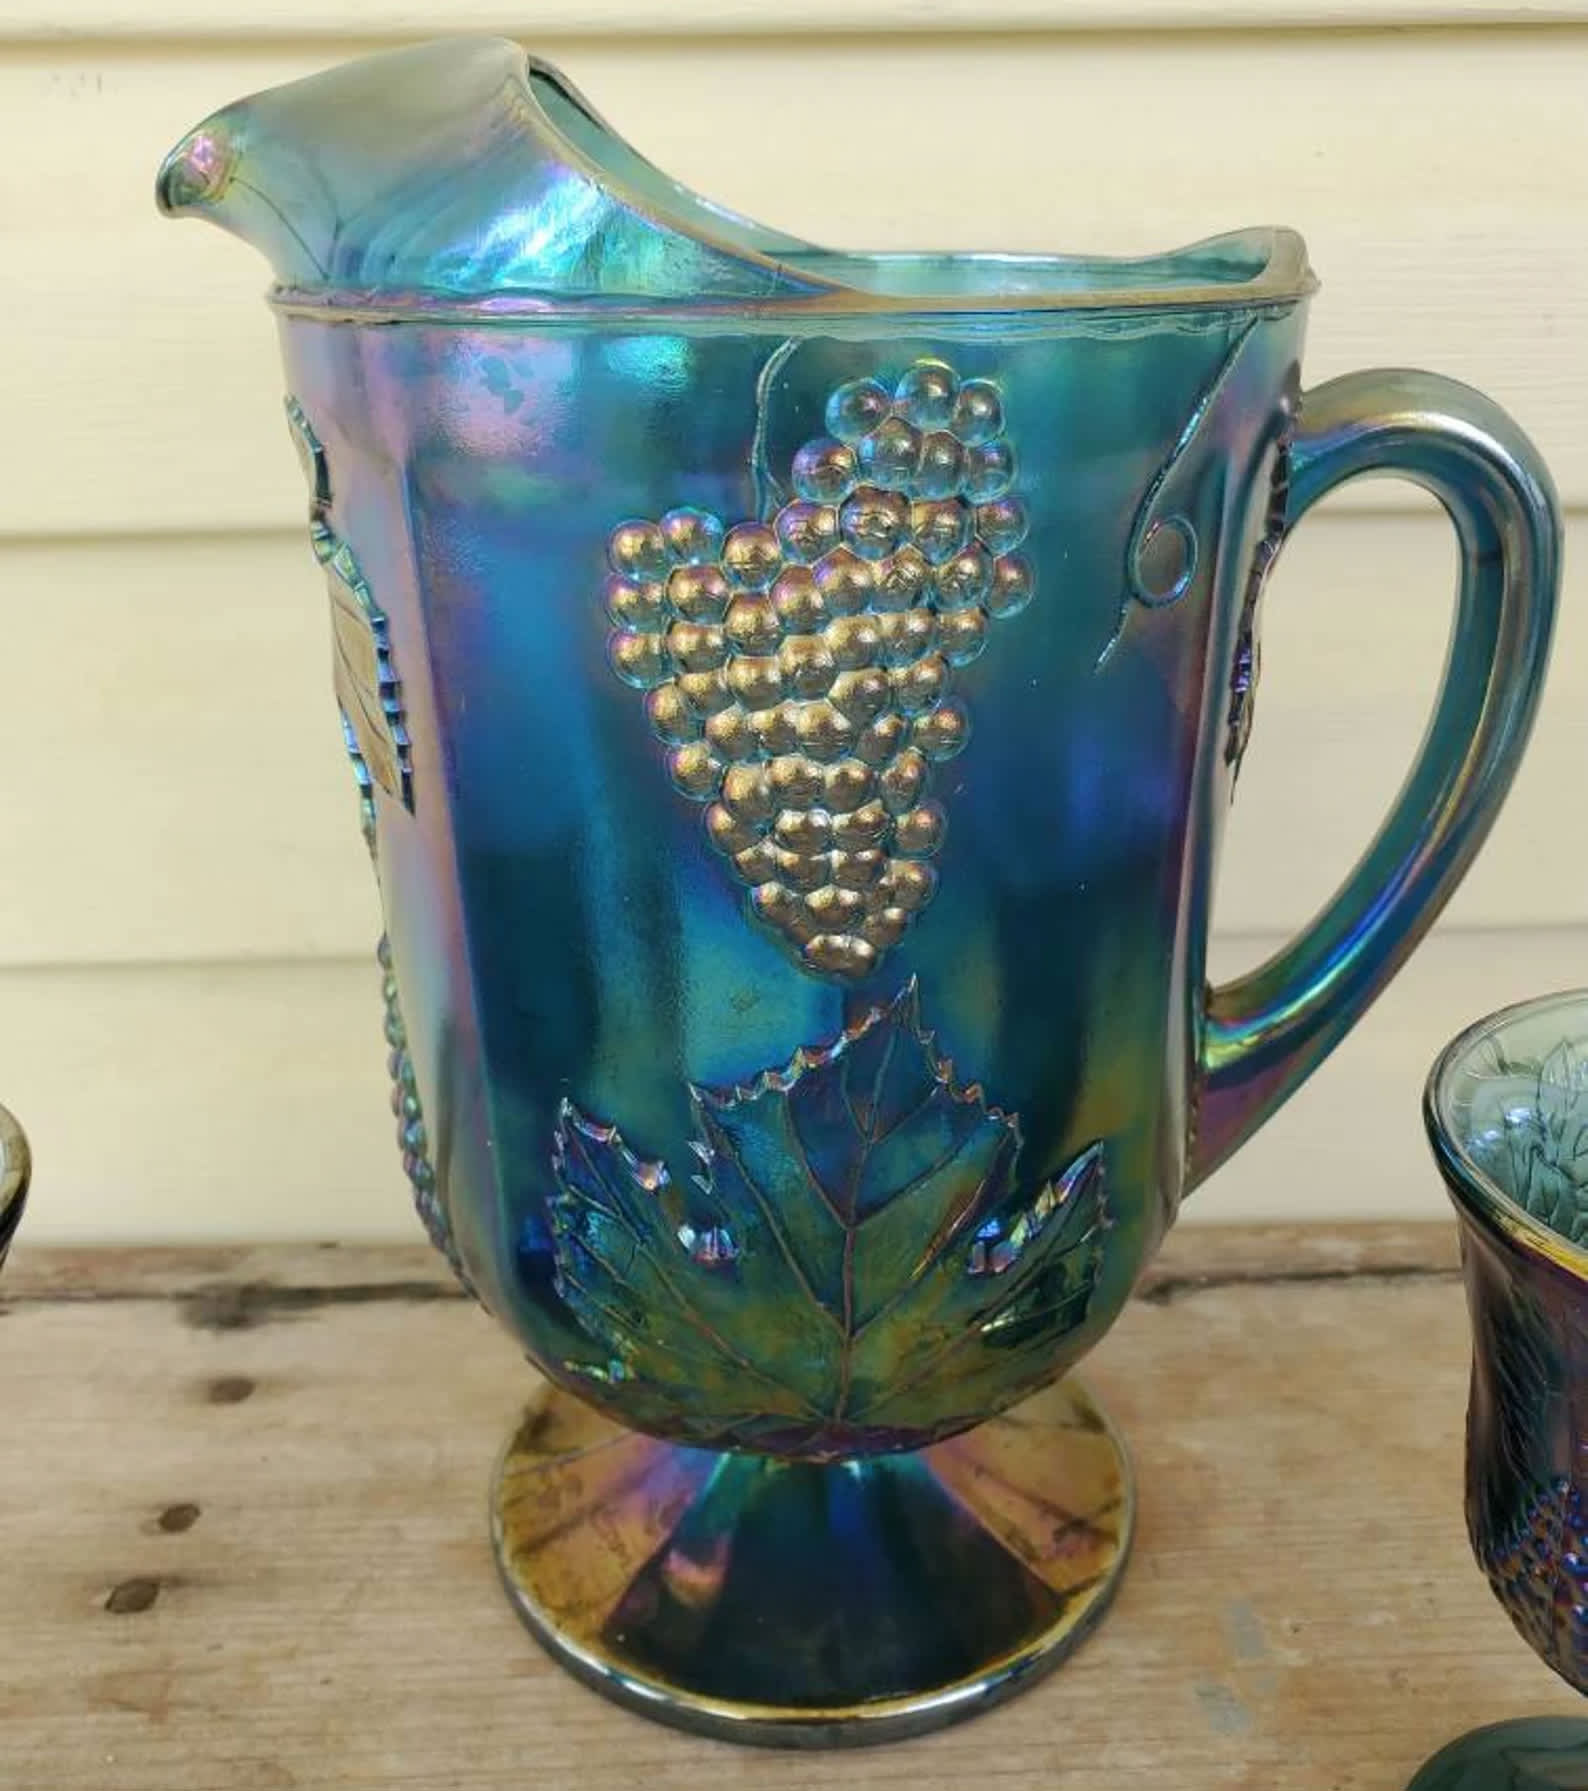 http://cdn.apartmenttherapy.info/image/upload/v1691013547/commerce/product-roundups/2023/2023-08-glass-pitchers/vintage-blue-carnival-glass-pitcher.jpg